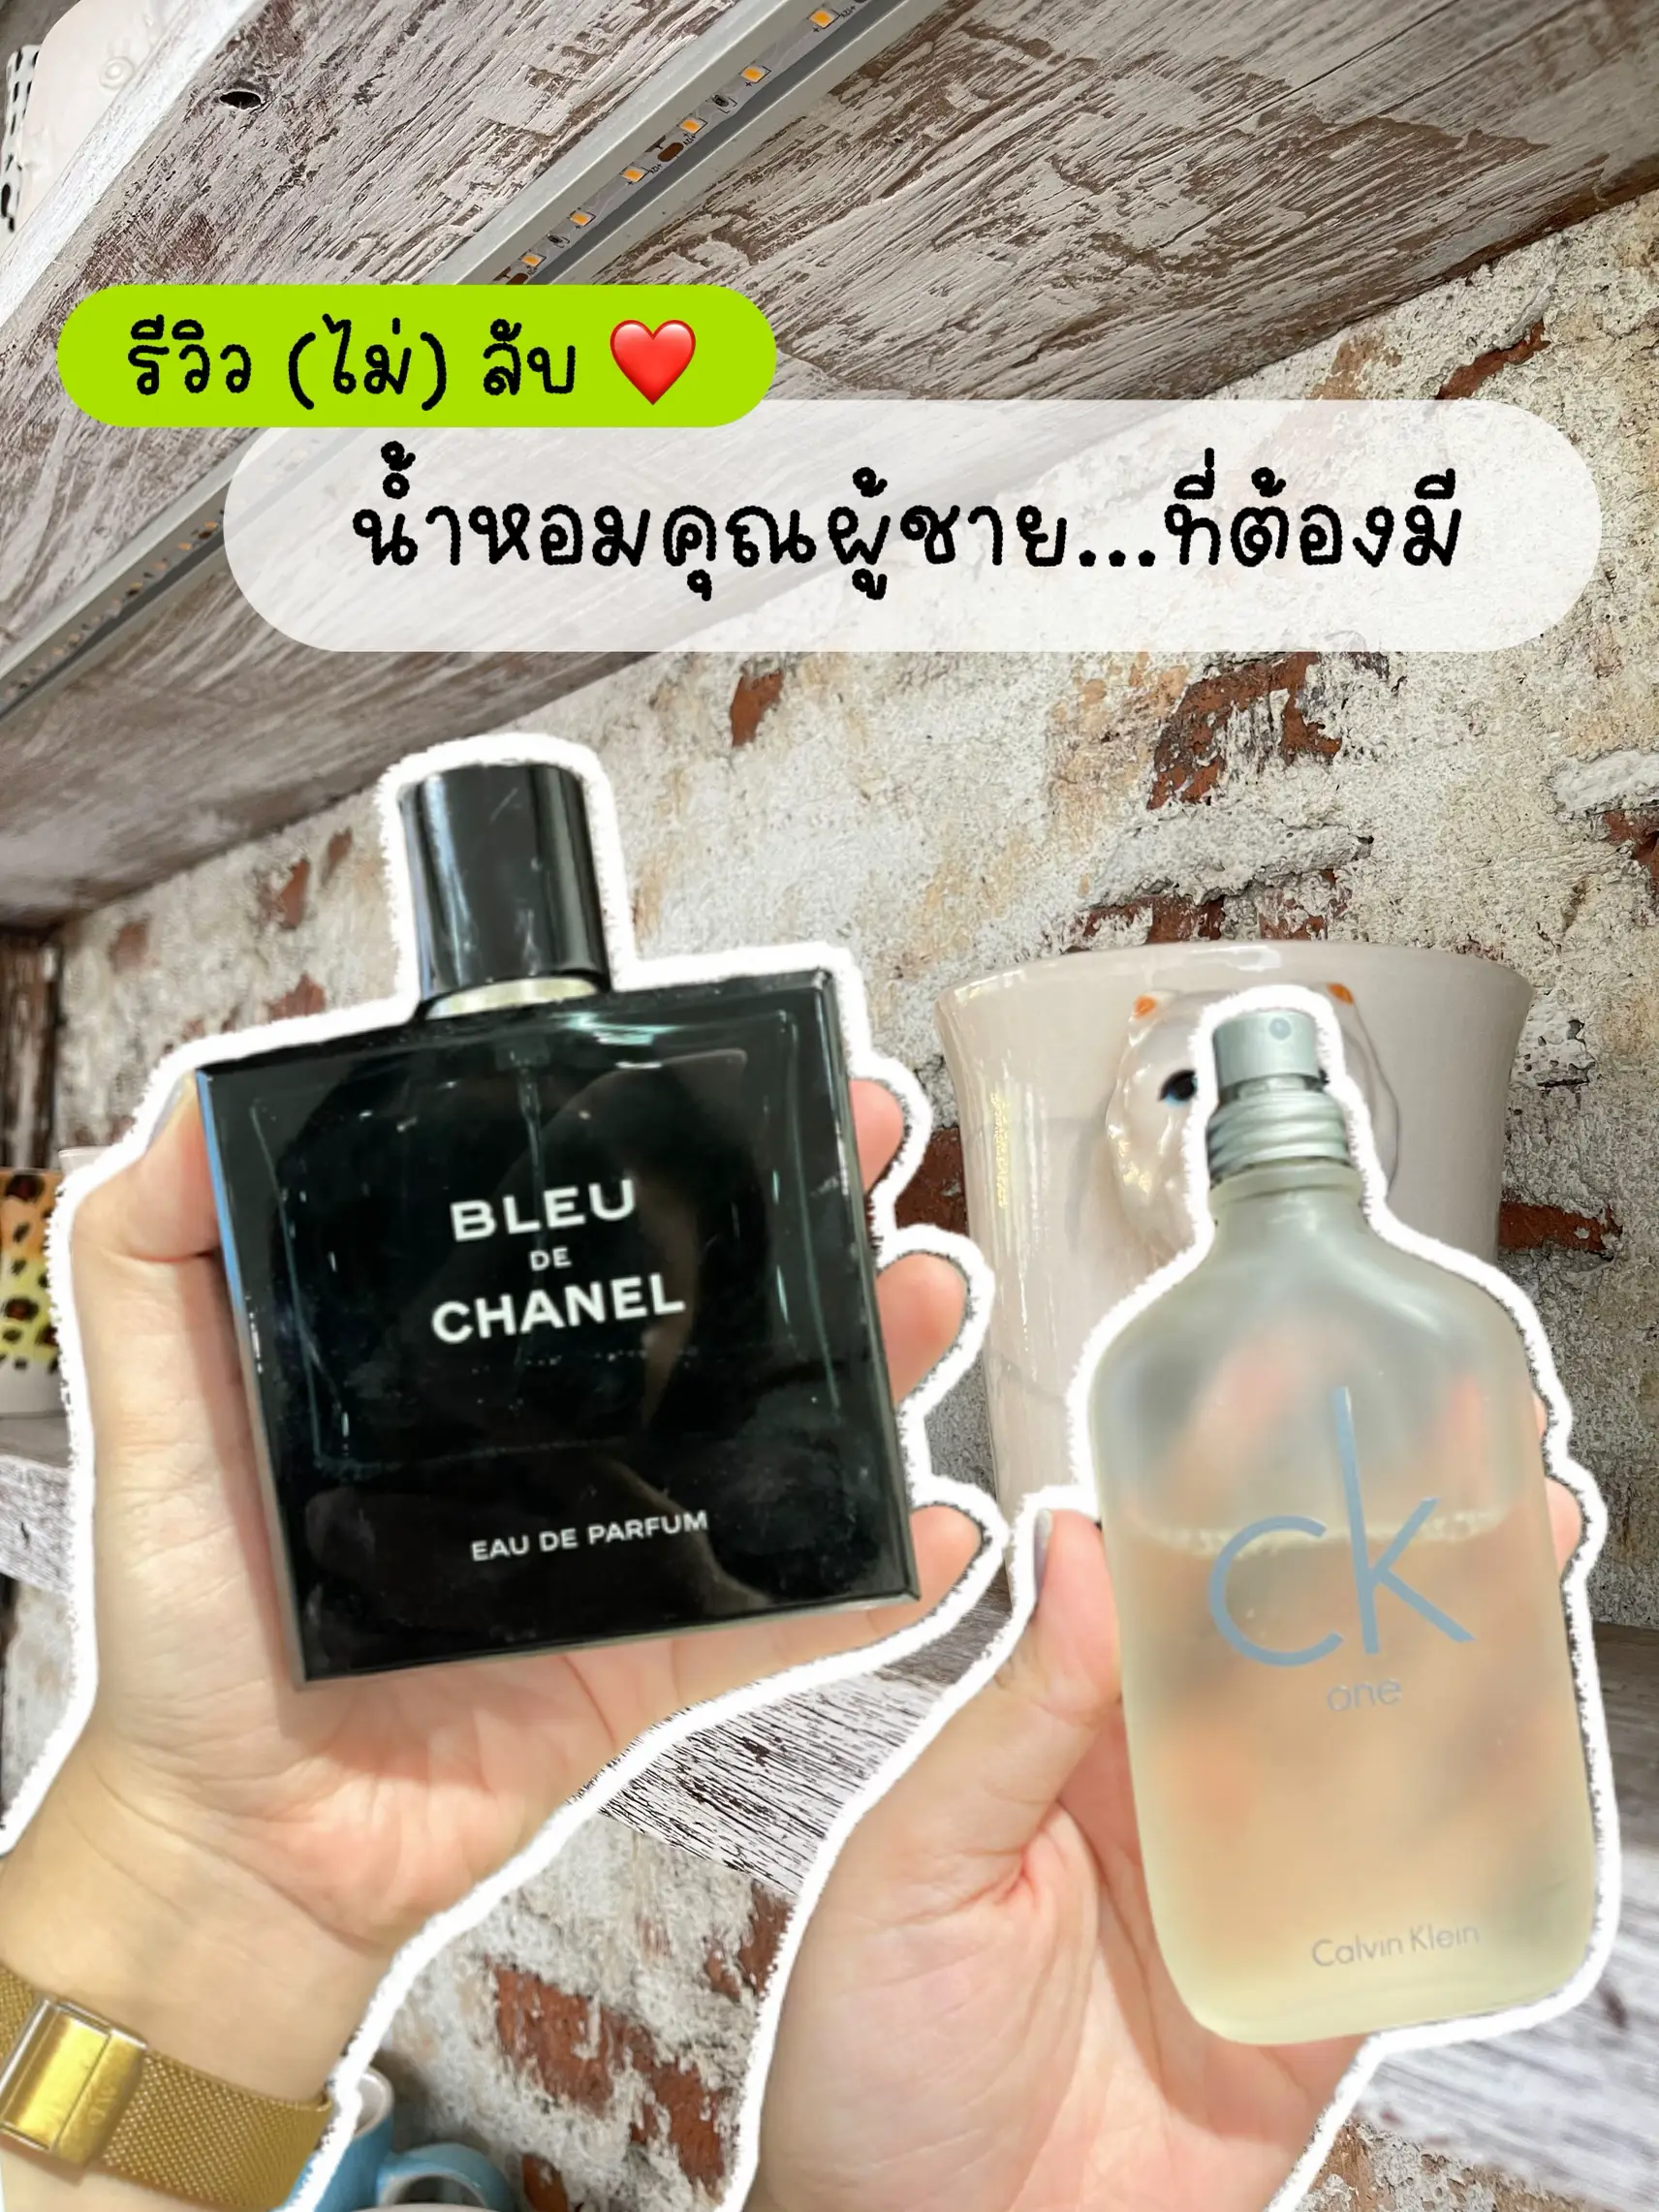 ✨Perfume, you men who like your girlfriend, Gallery posted by ᴘᴏᴜɴᴅ.🐰✨